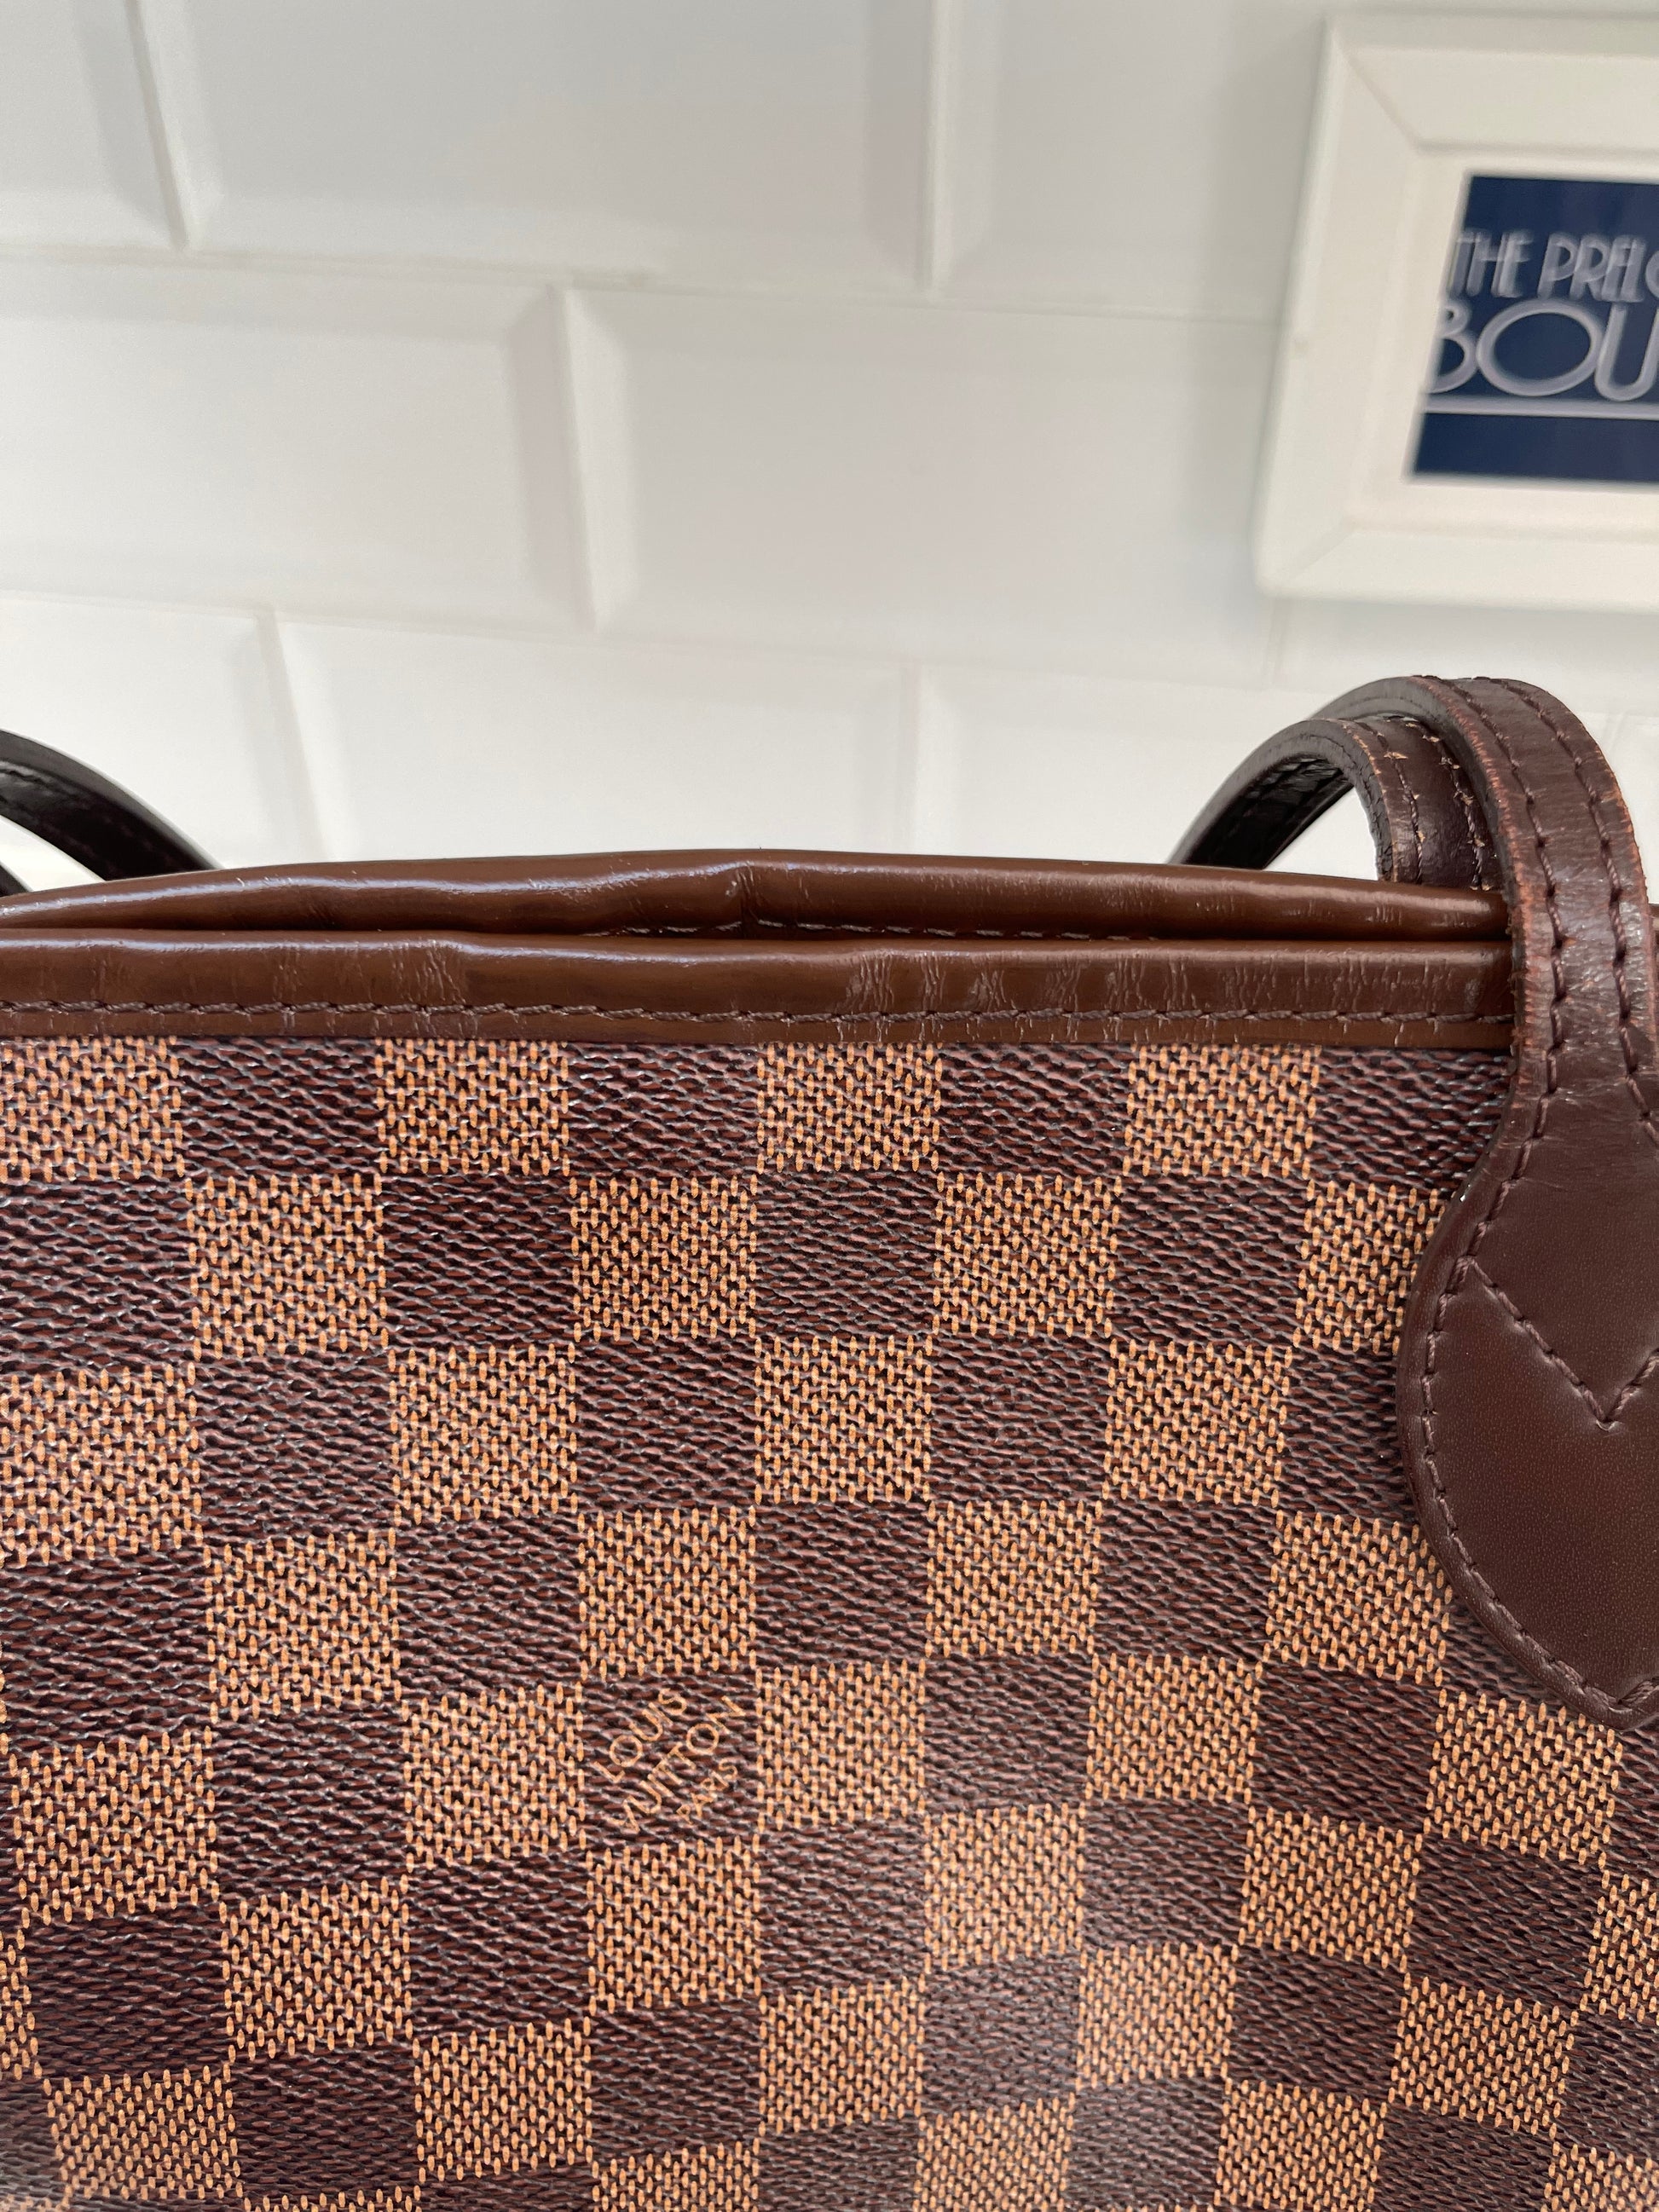 LOUIS VUITTON // Neverfull MM in Damier Ebene $1,695 You can never go wrong  with a Neverfull. Shop now at www.byrdstyle.com Byrd…